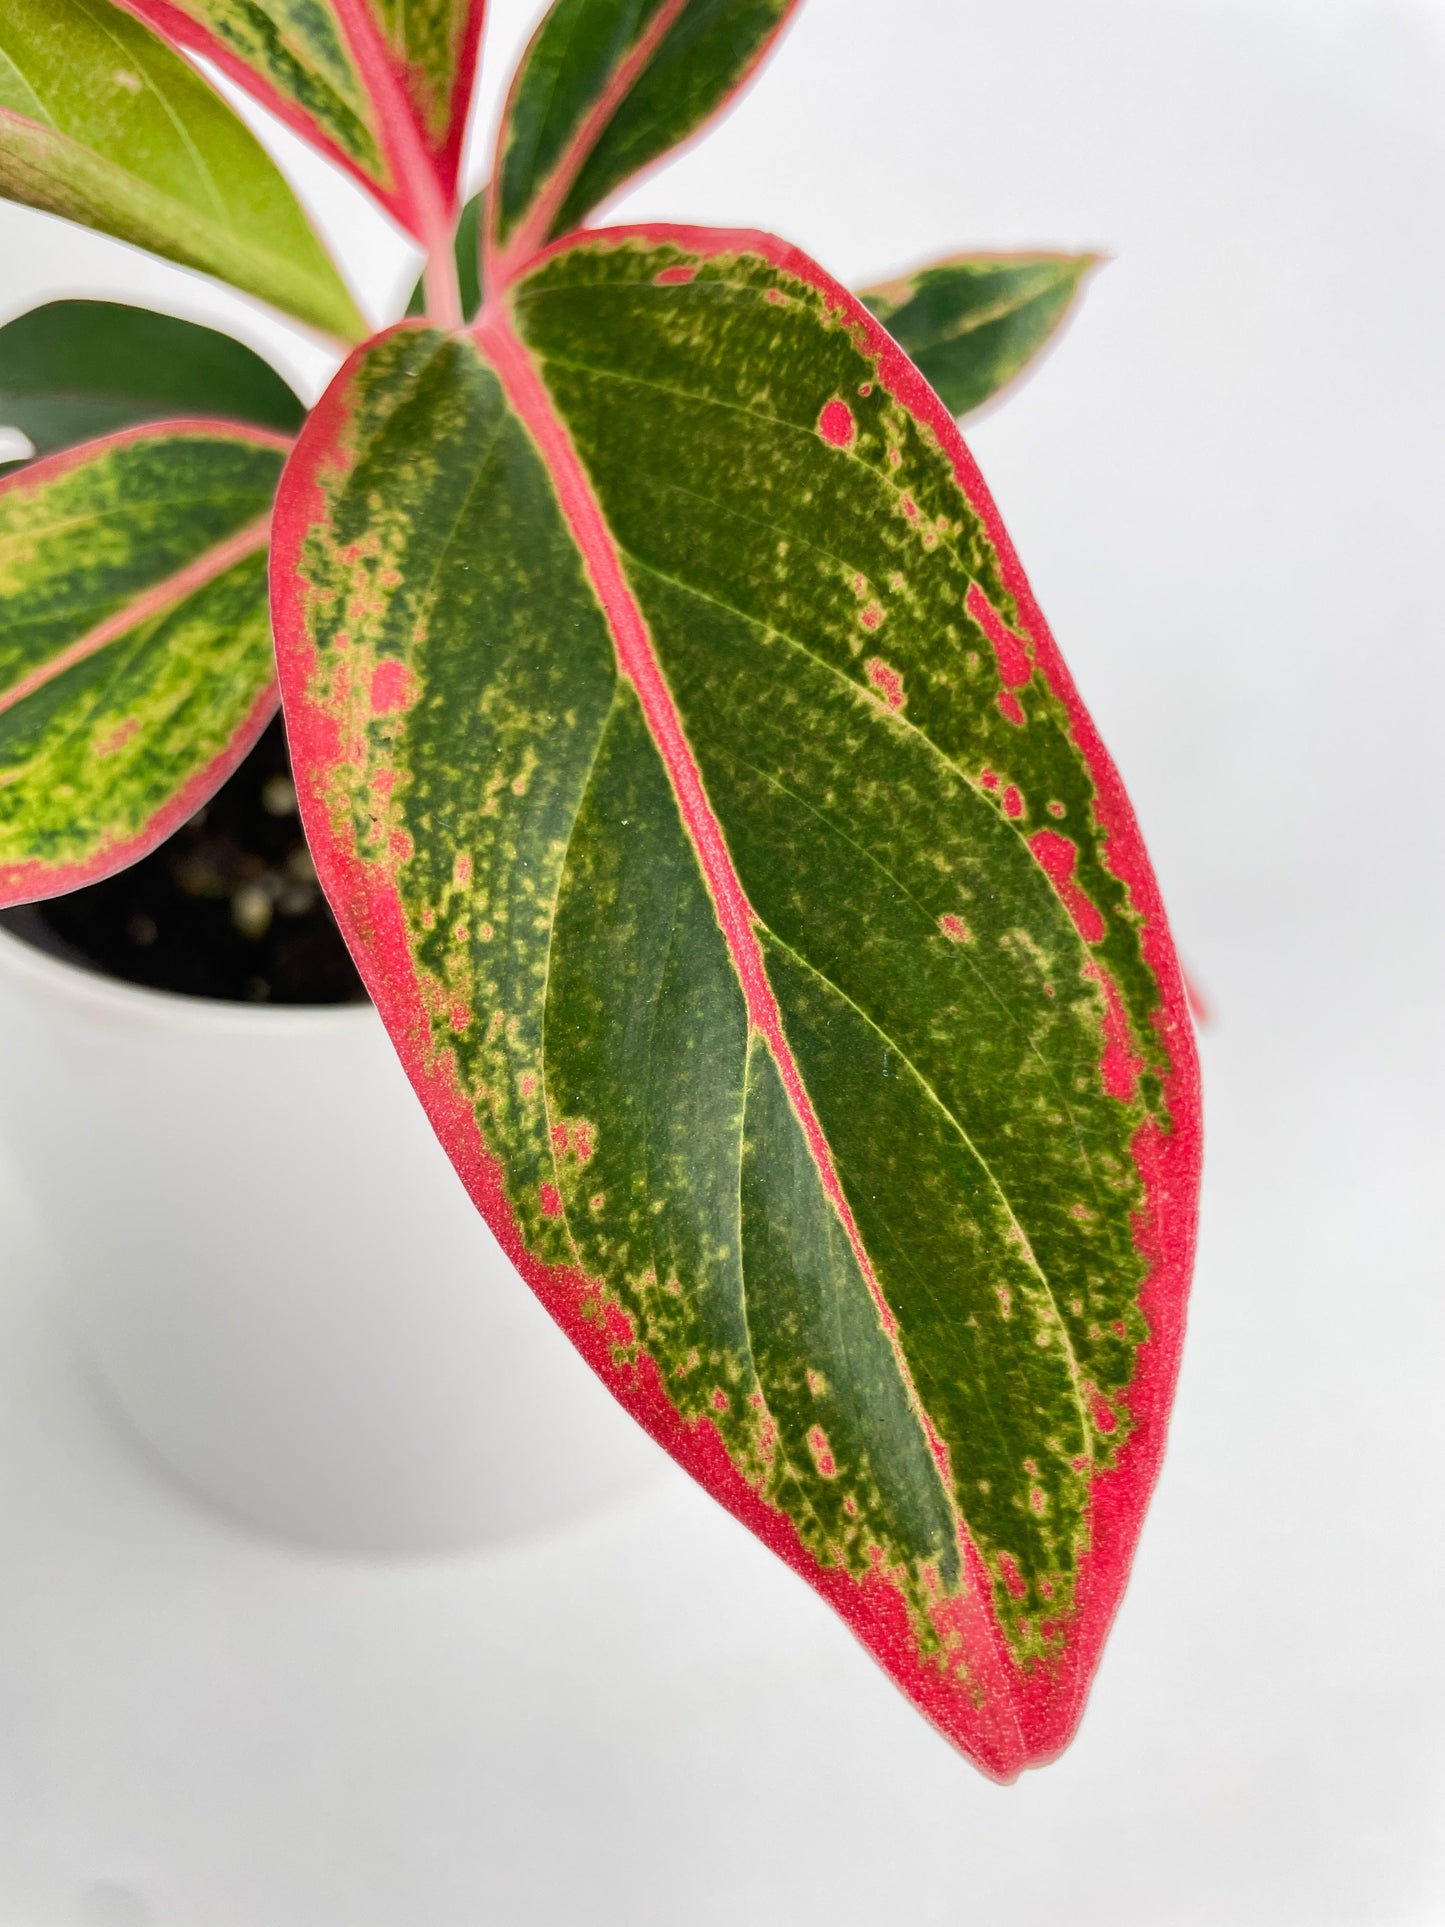 Aglaonema Red Siam Aura by Bumble Plants